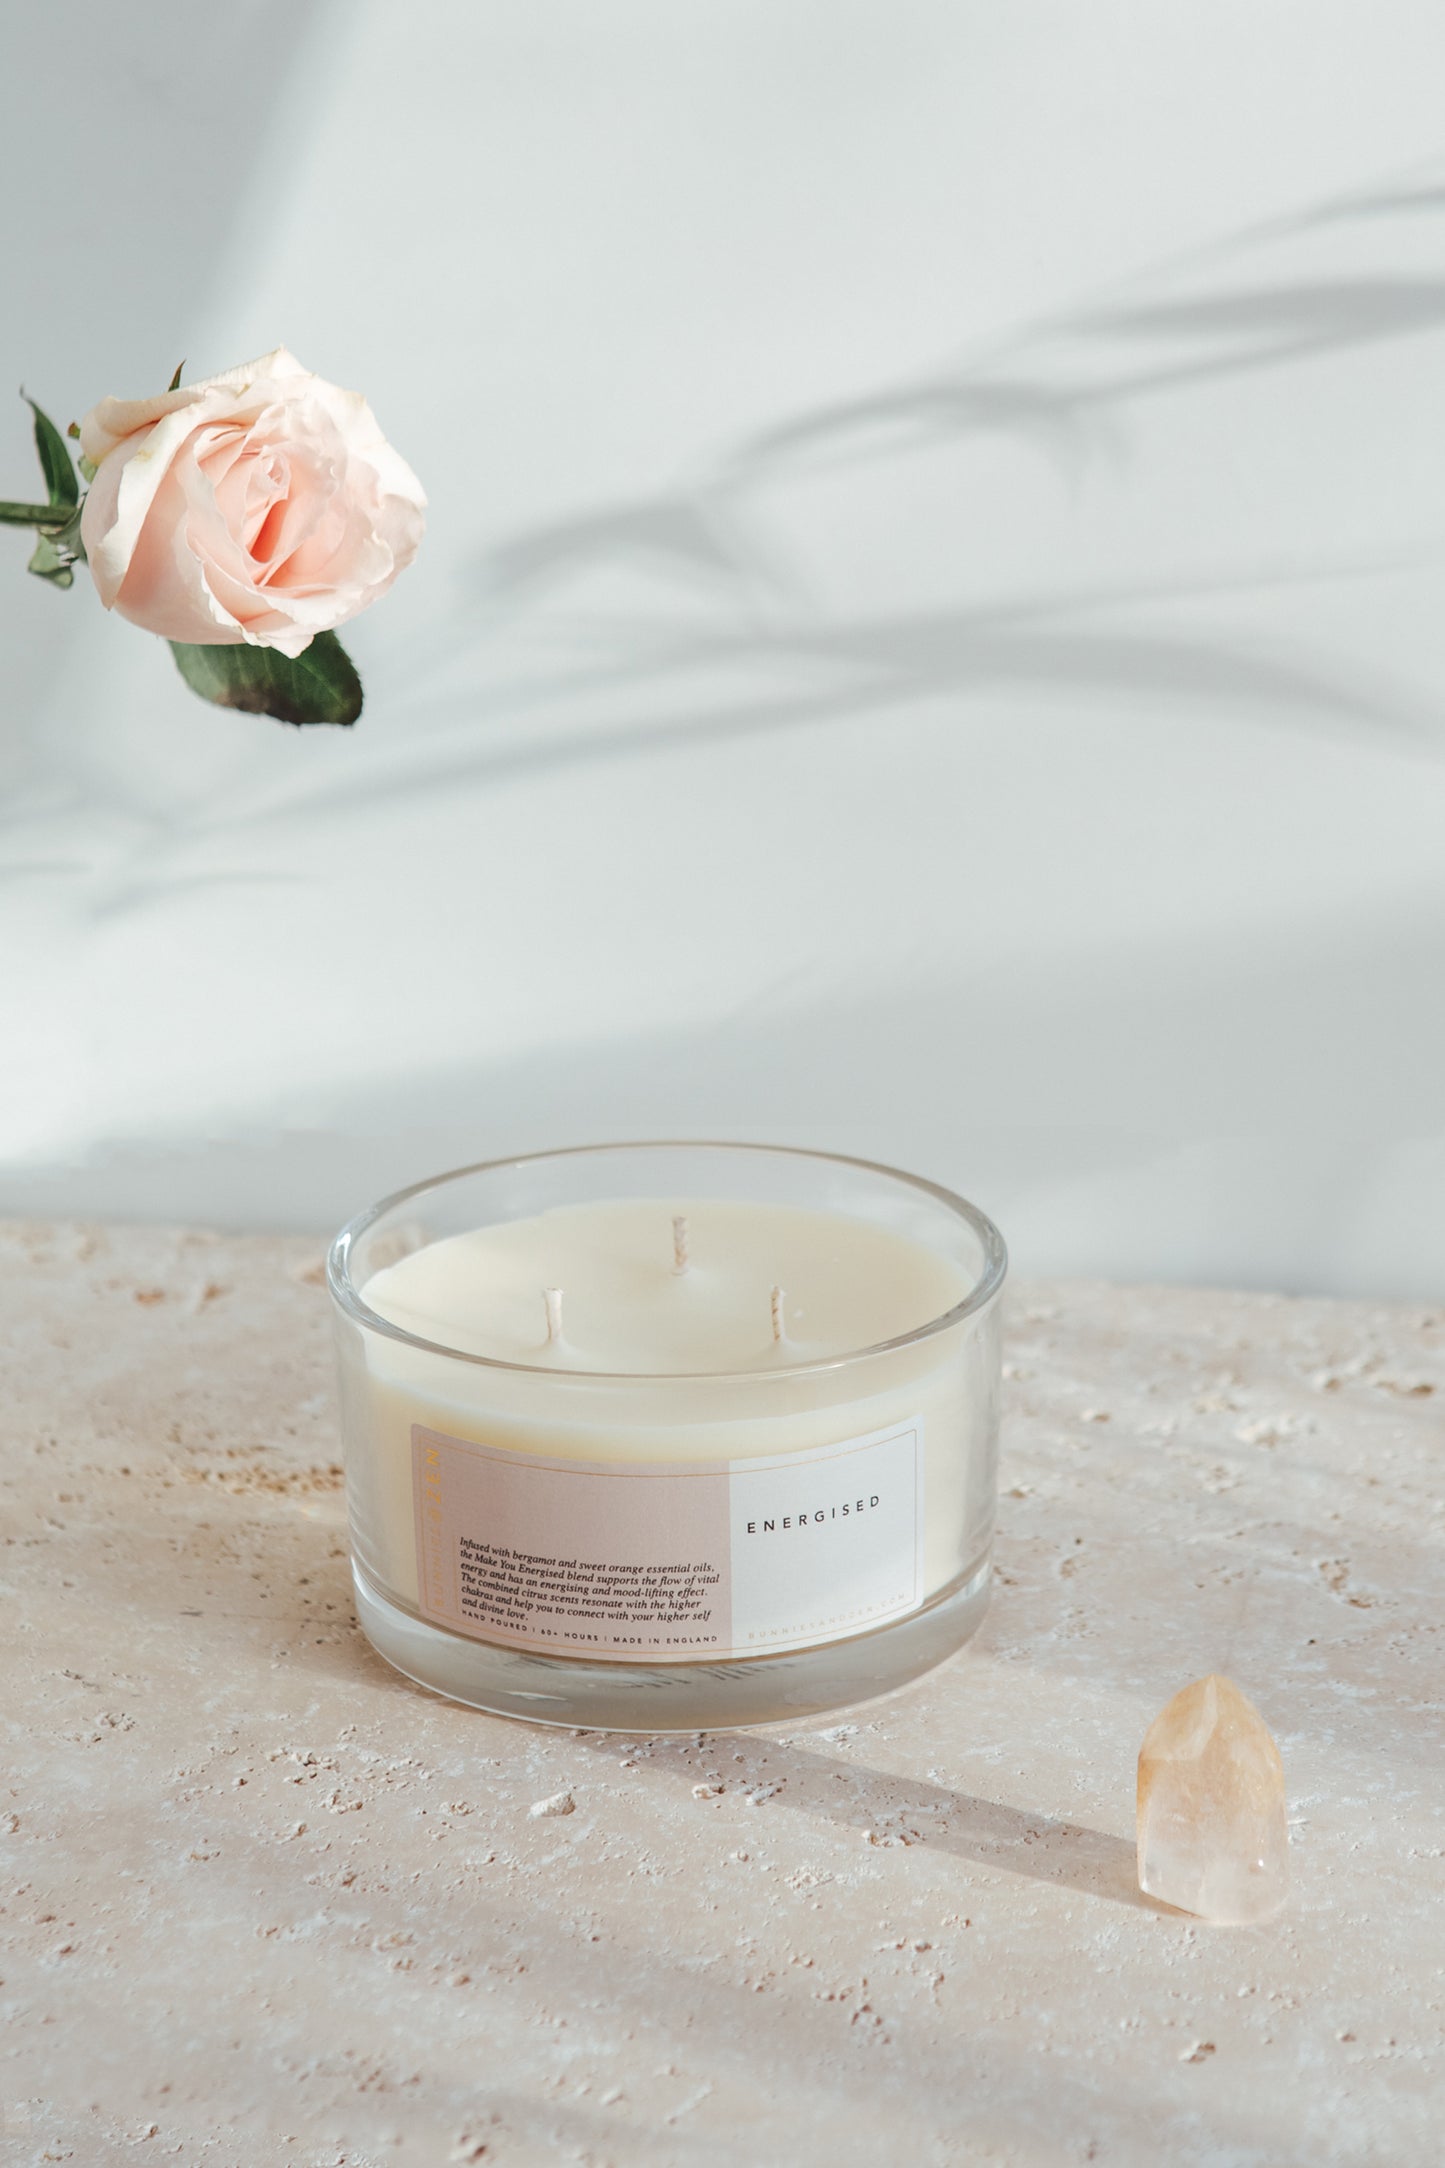 Make You Energised | Three-Wick Candle